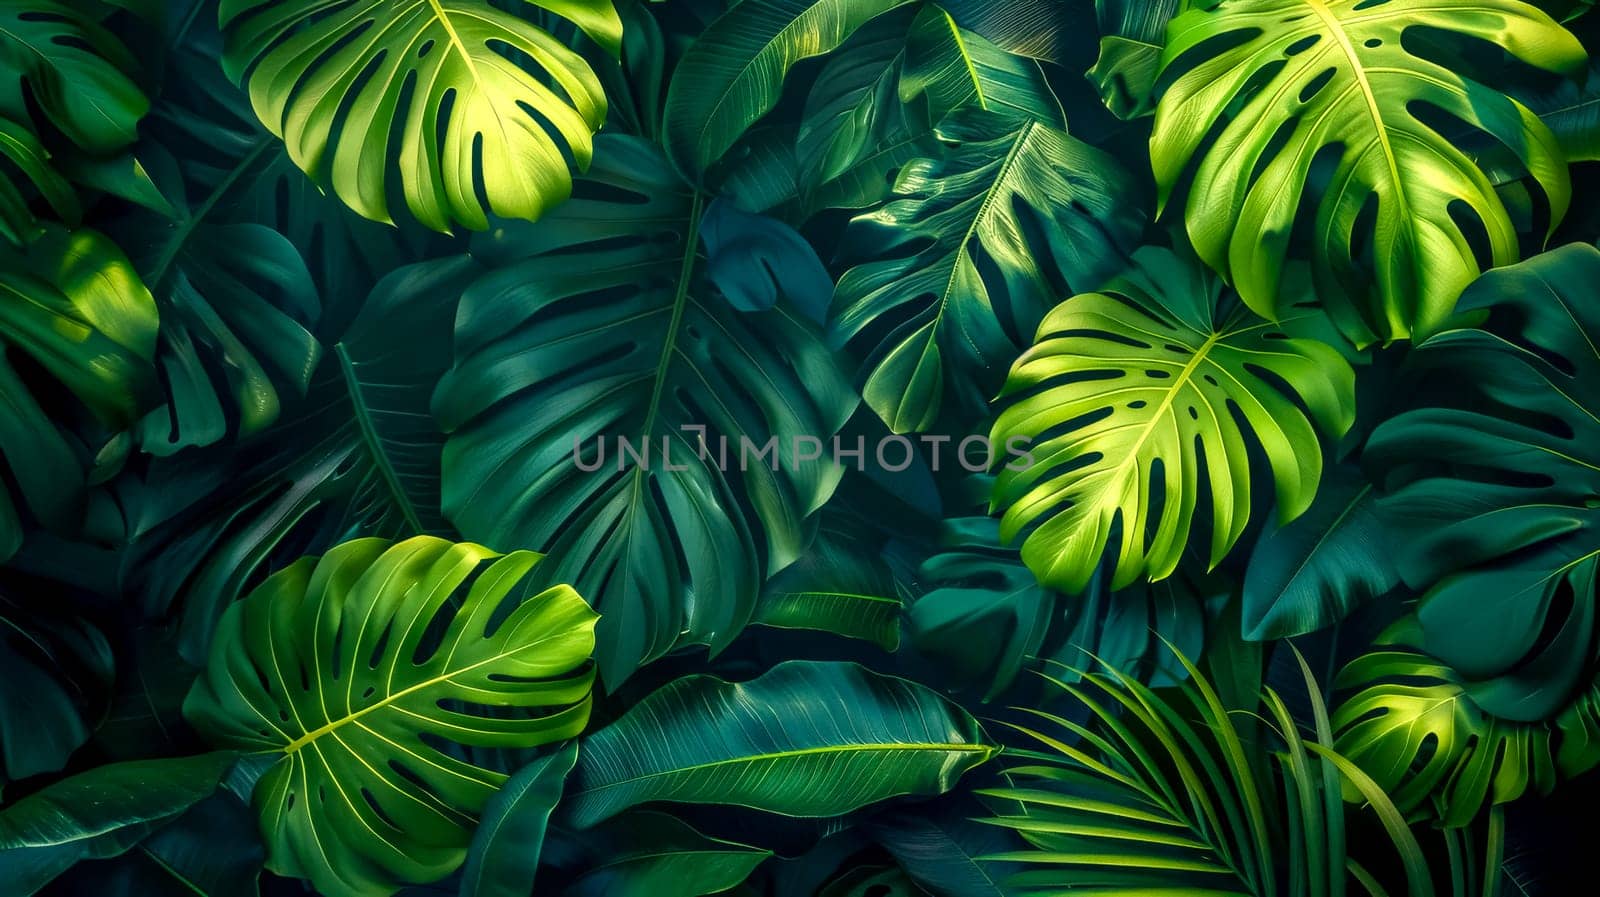 Lush tropical green leaves background by Edophoto